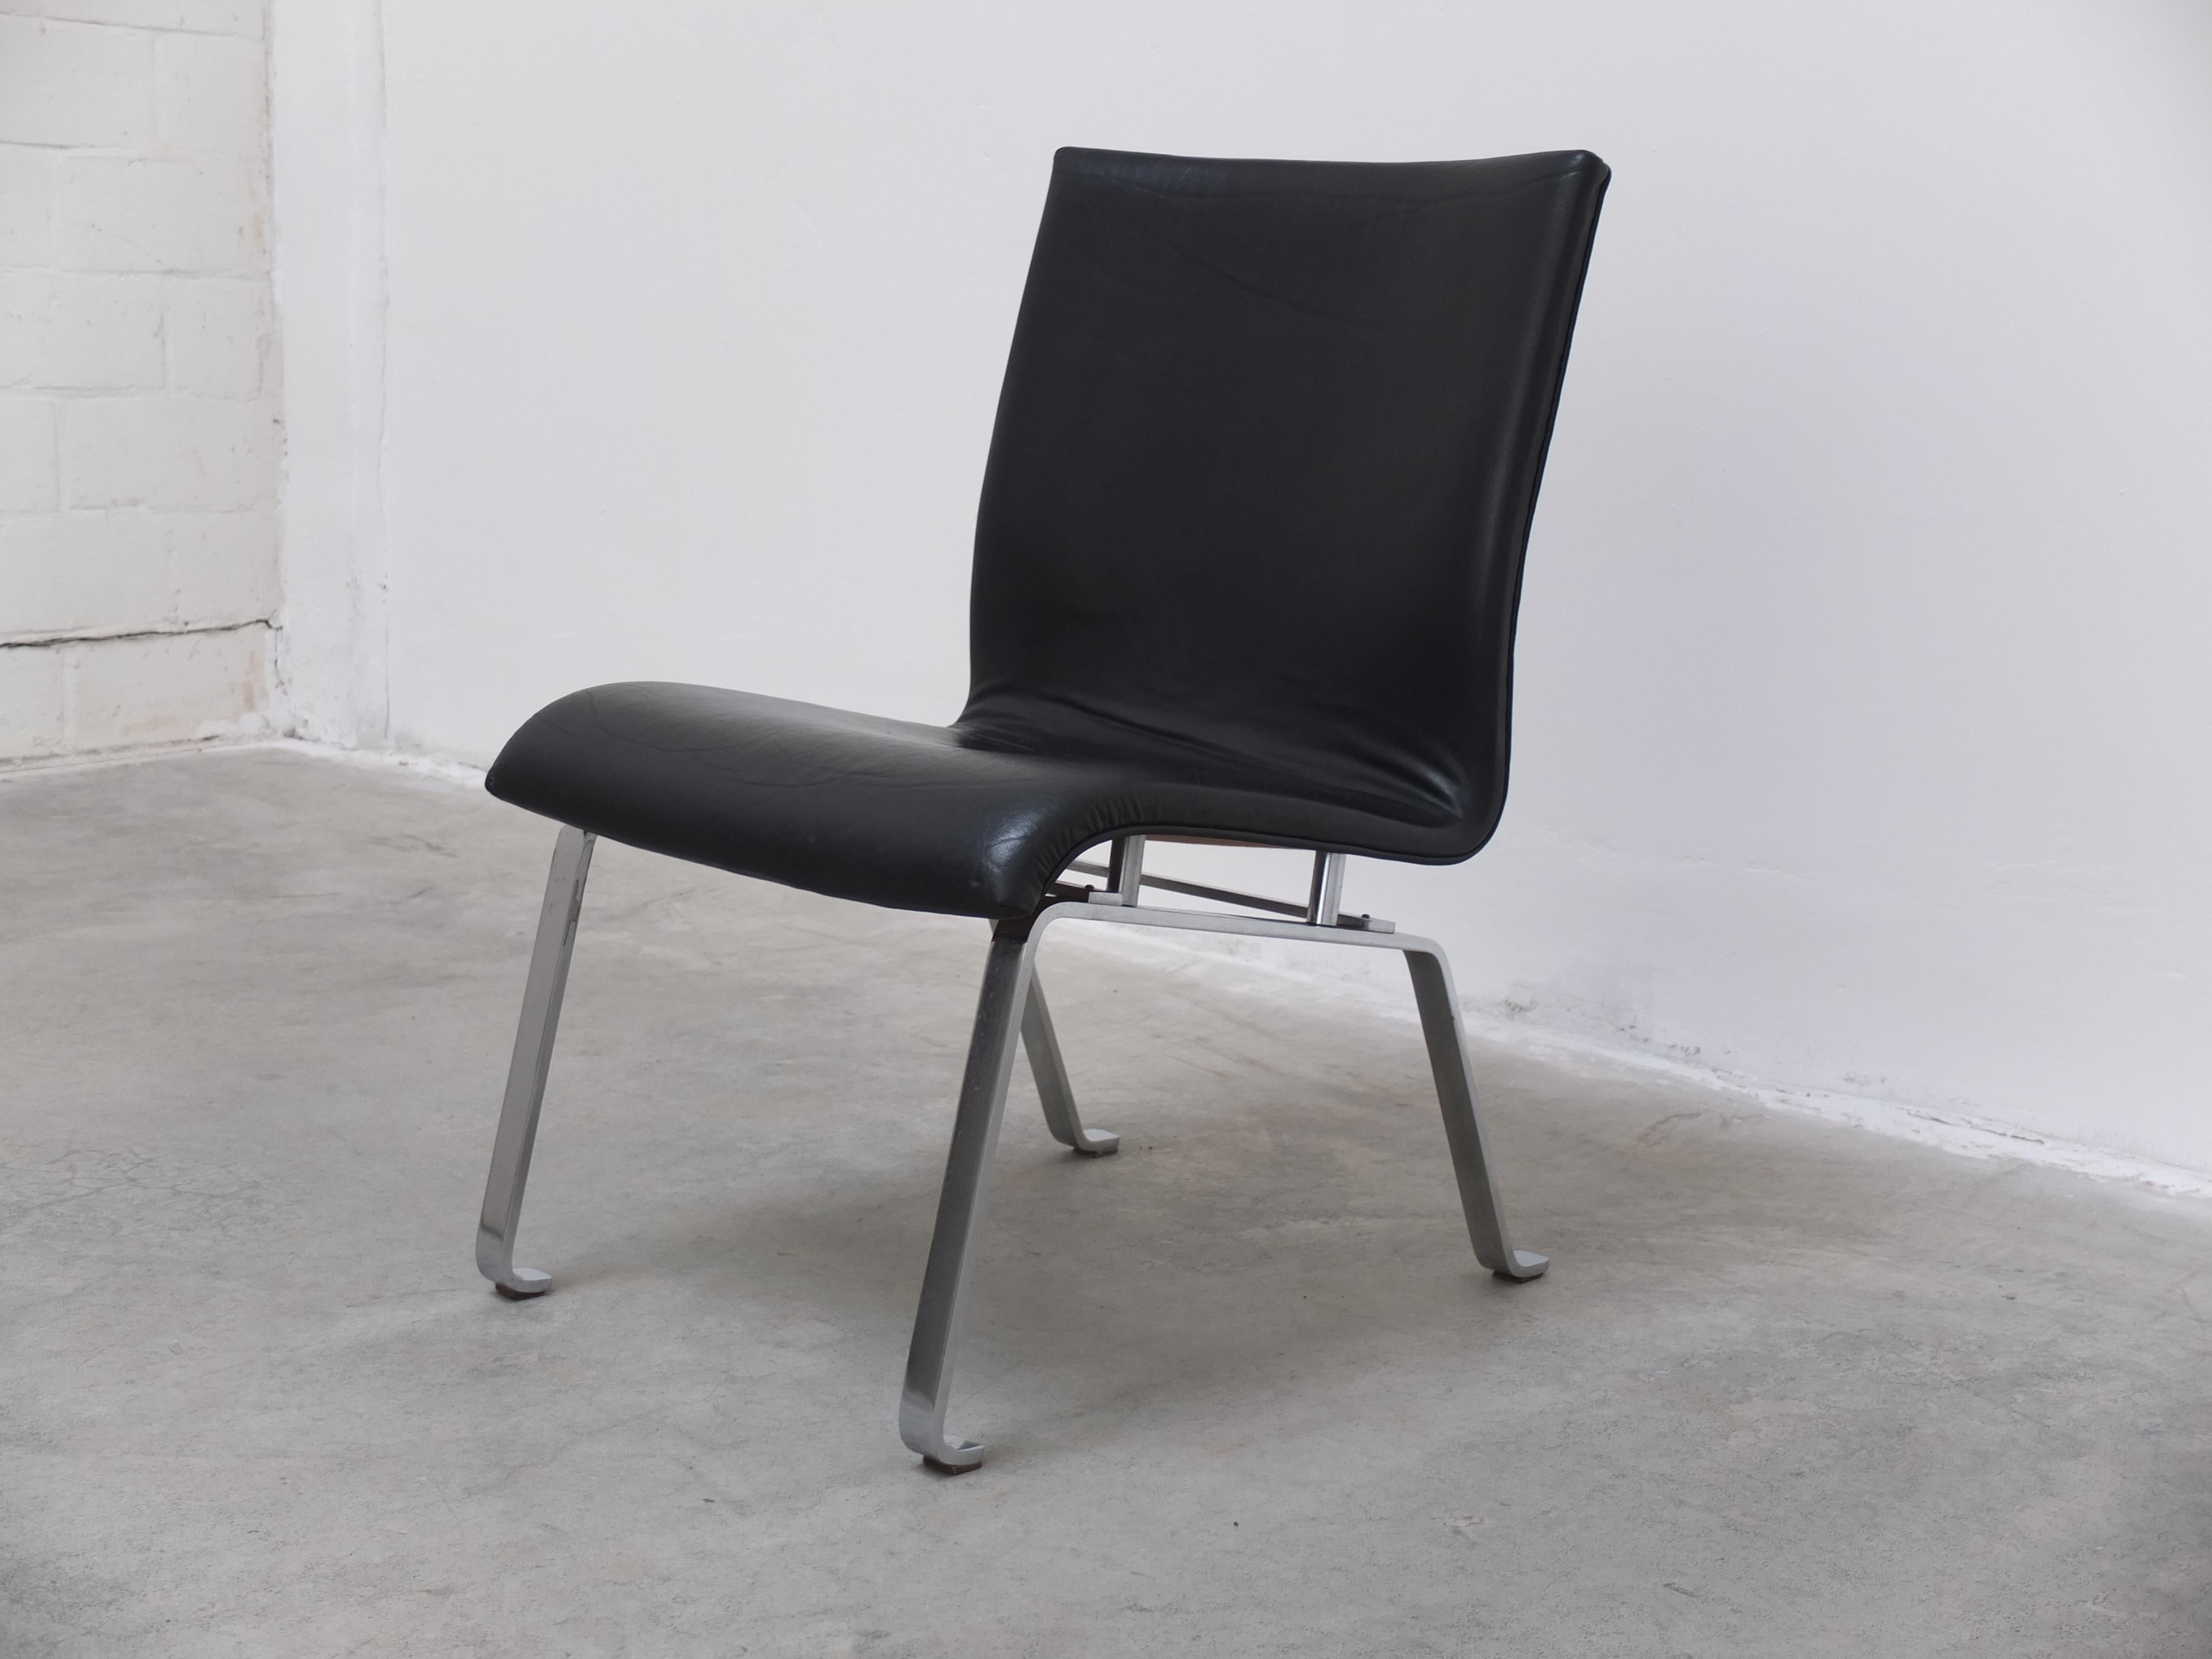 Unique Black Leather & Steel Modernist Lounge Chair, 1960s For Sale 4